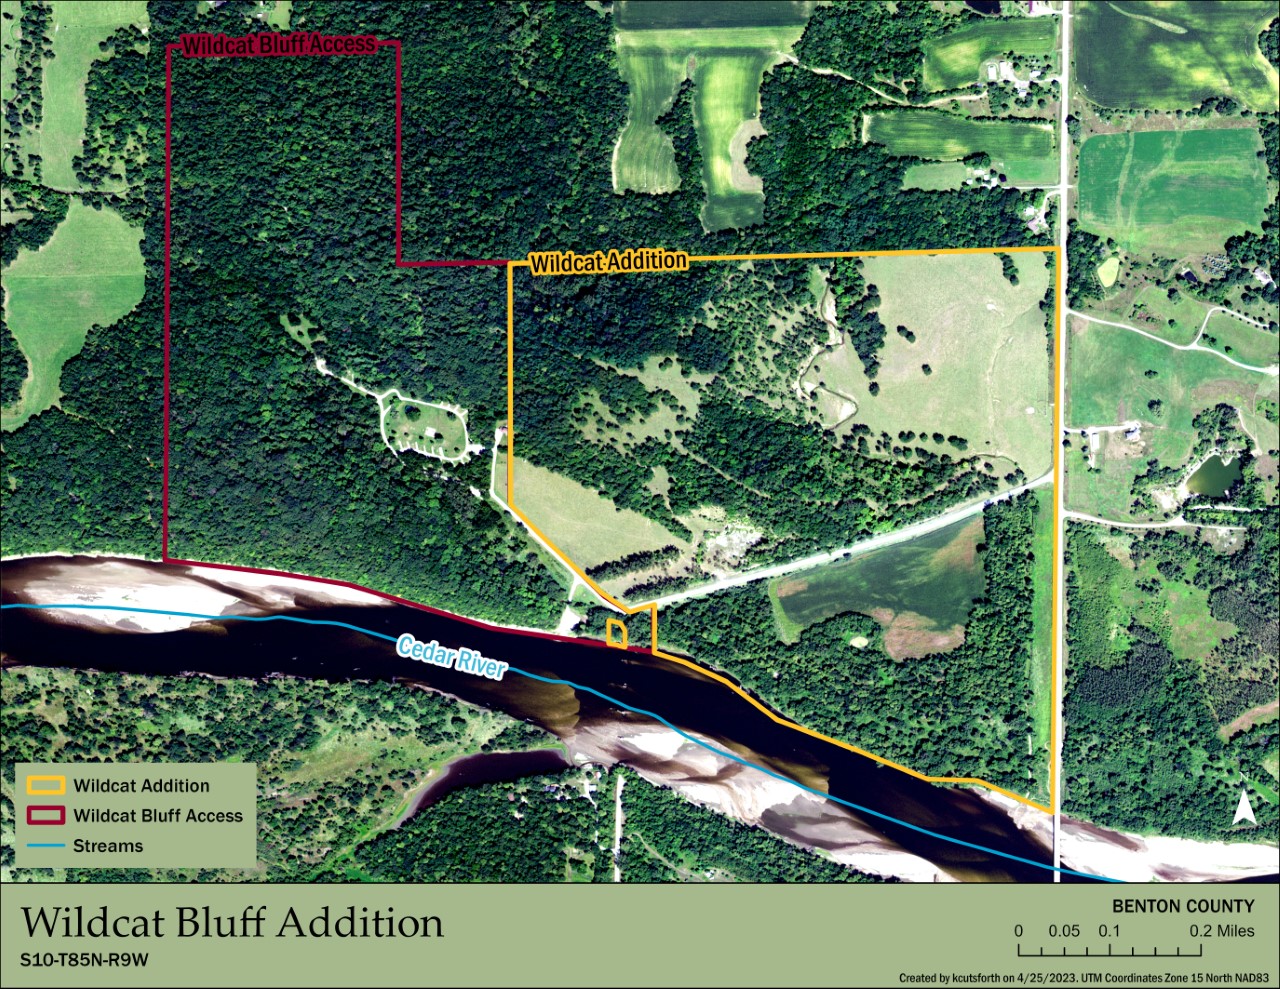 Map showing boundaries for Wildcat Bluff and the new proposed addition